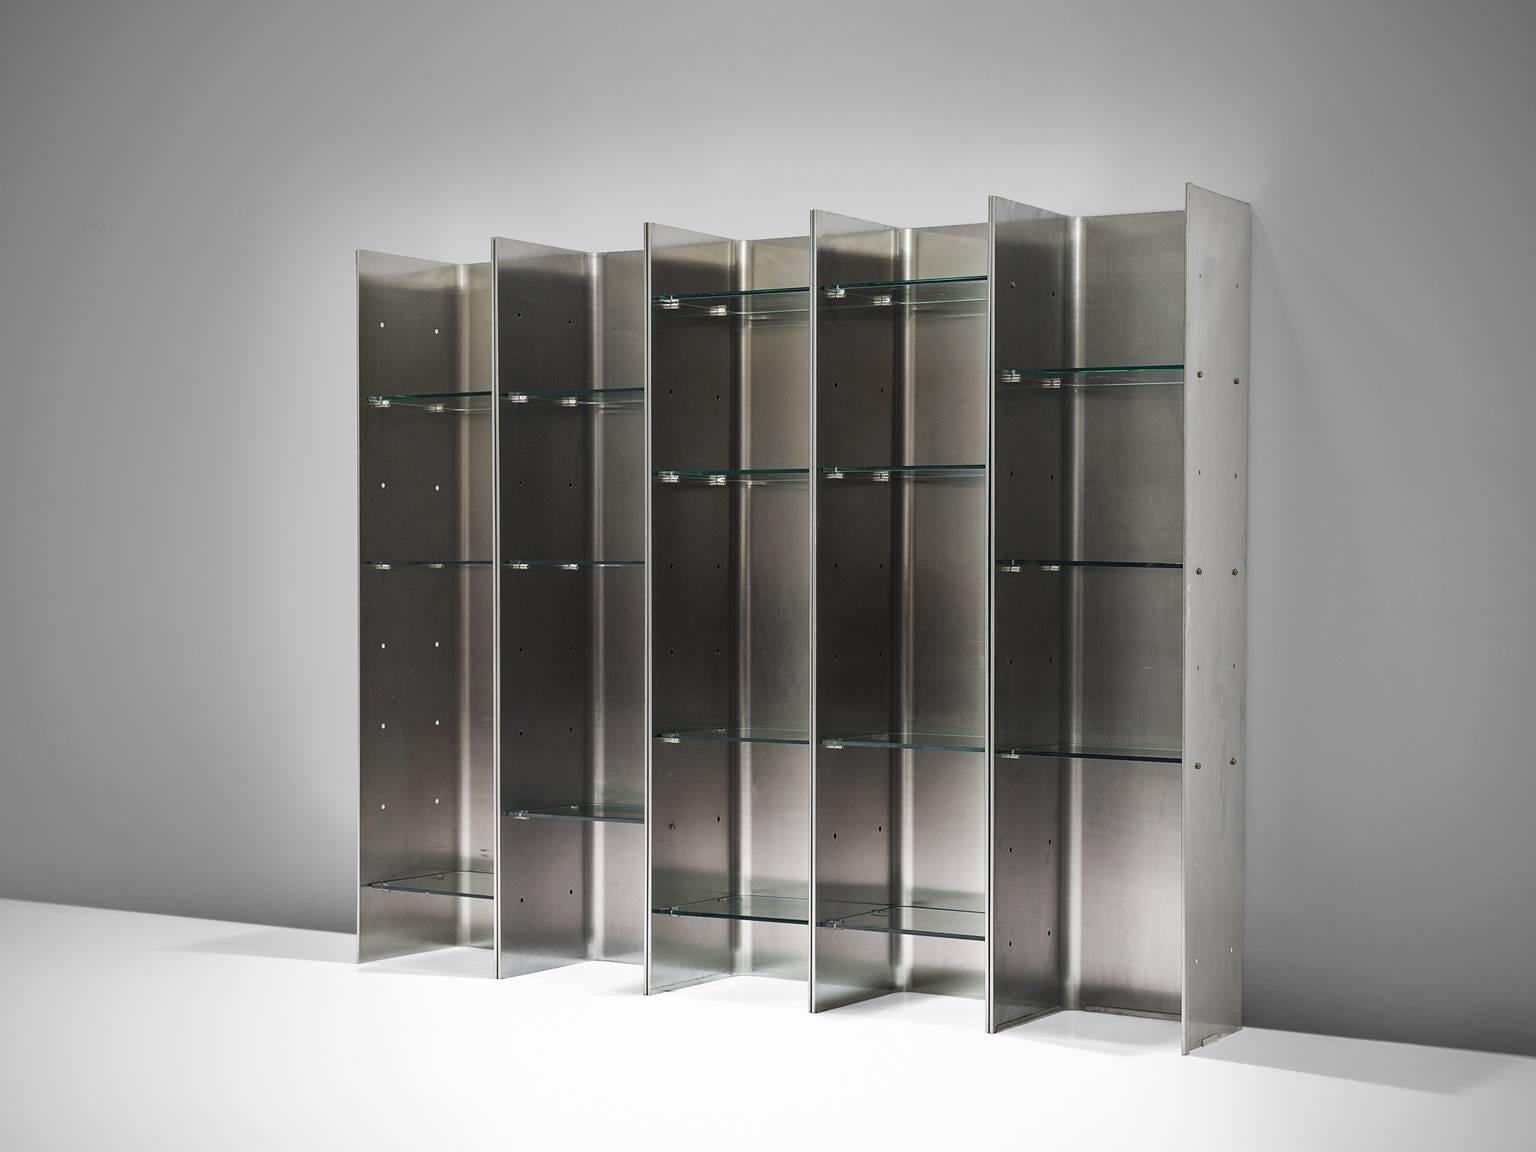 Bookcase by Carla Venosta & Guido Zimmerman for Arflex, Italy, 1970s

This steel bookcase with plexiglass shelves has a clean and geometric design which is emphasized by the rawness of the materials. This particular unit consists of five vertical